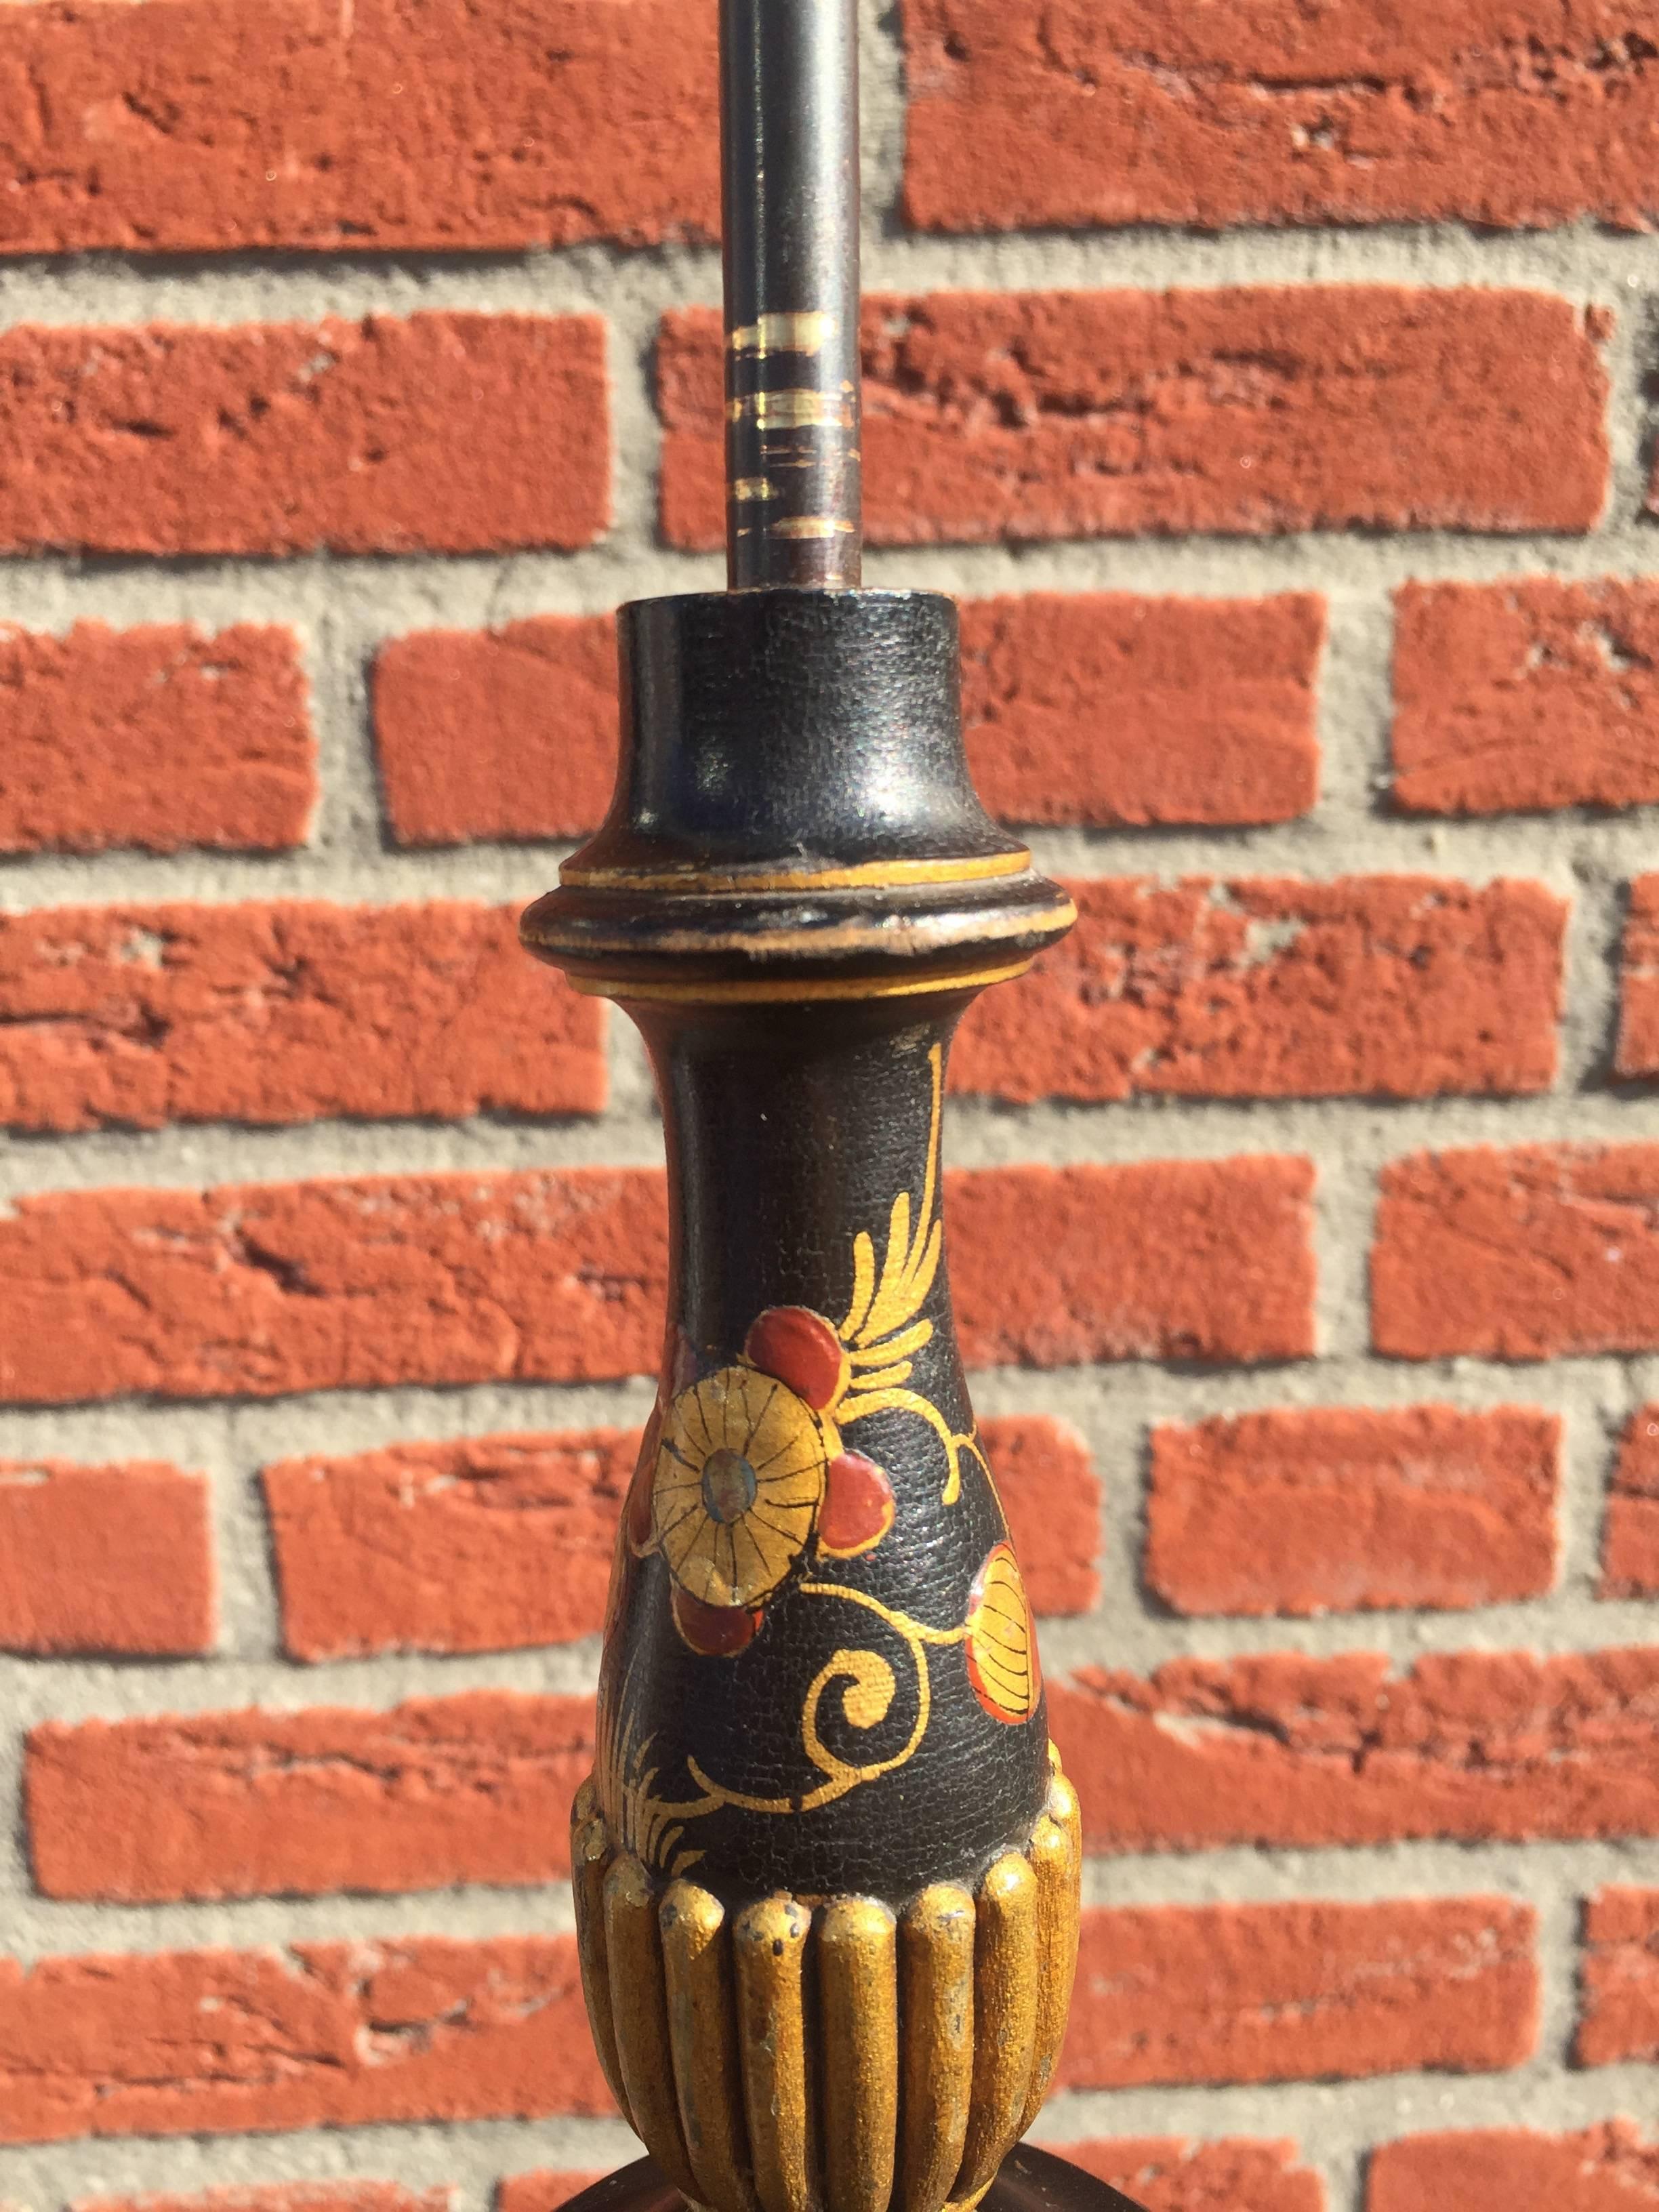 Early 1900s Wooden Chinoiserie Floor Lamp with Lacquer Decor and Chinese Motifs 1